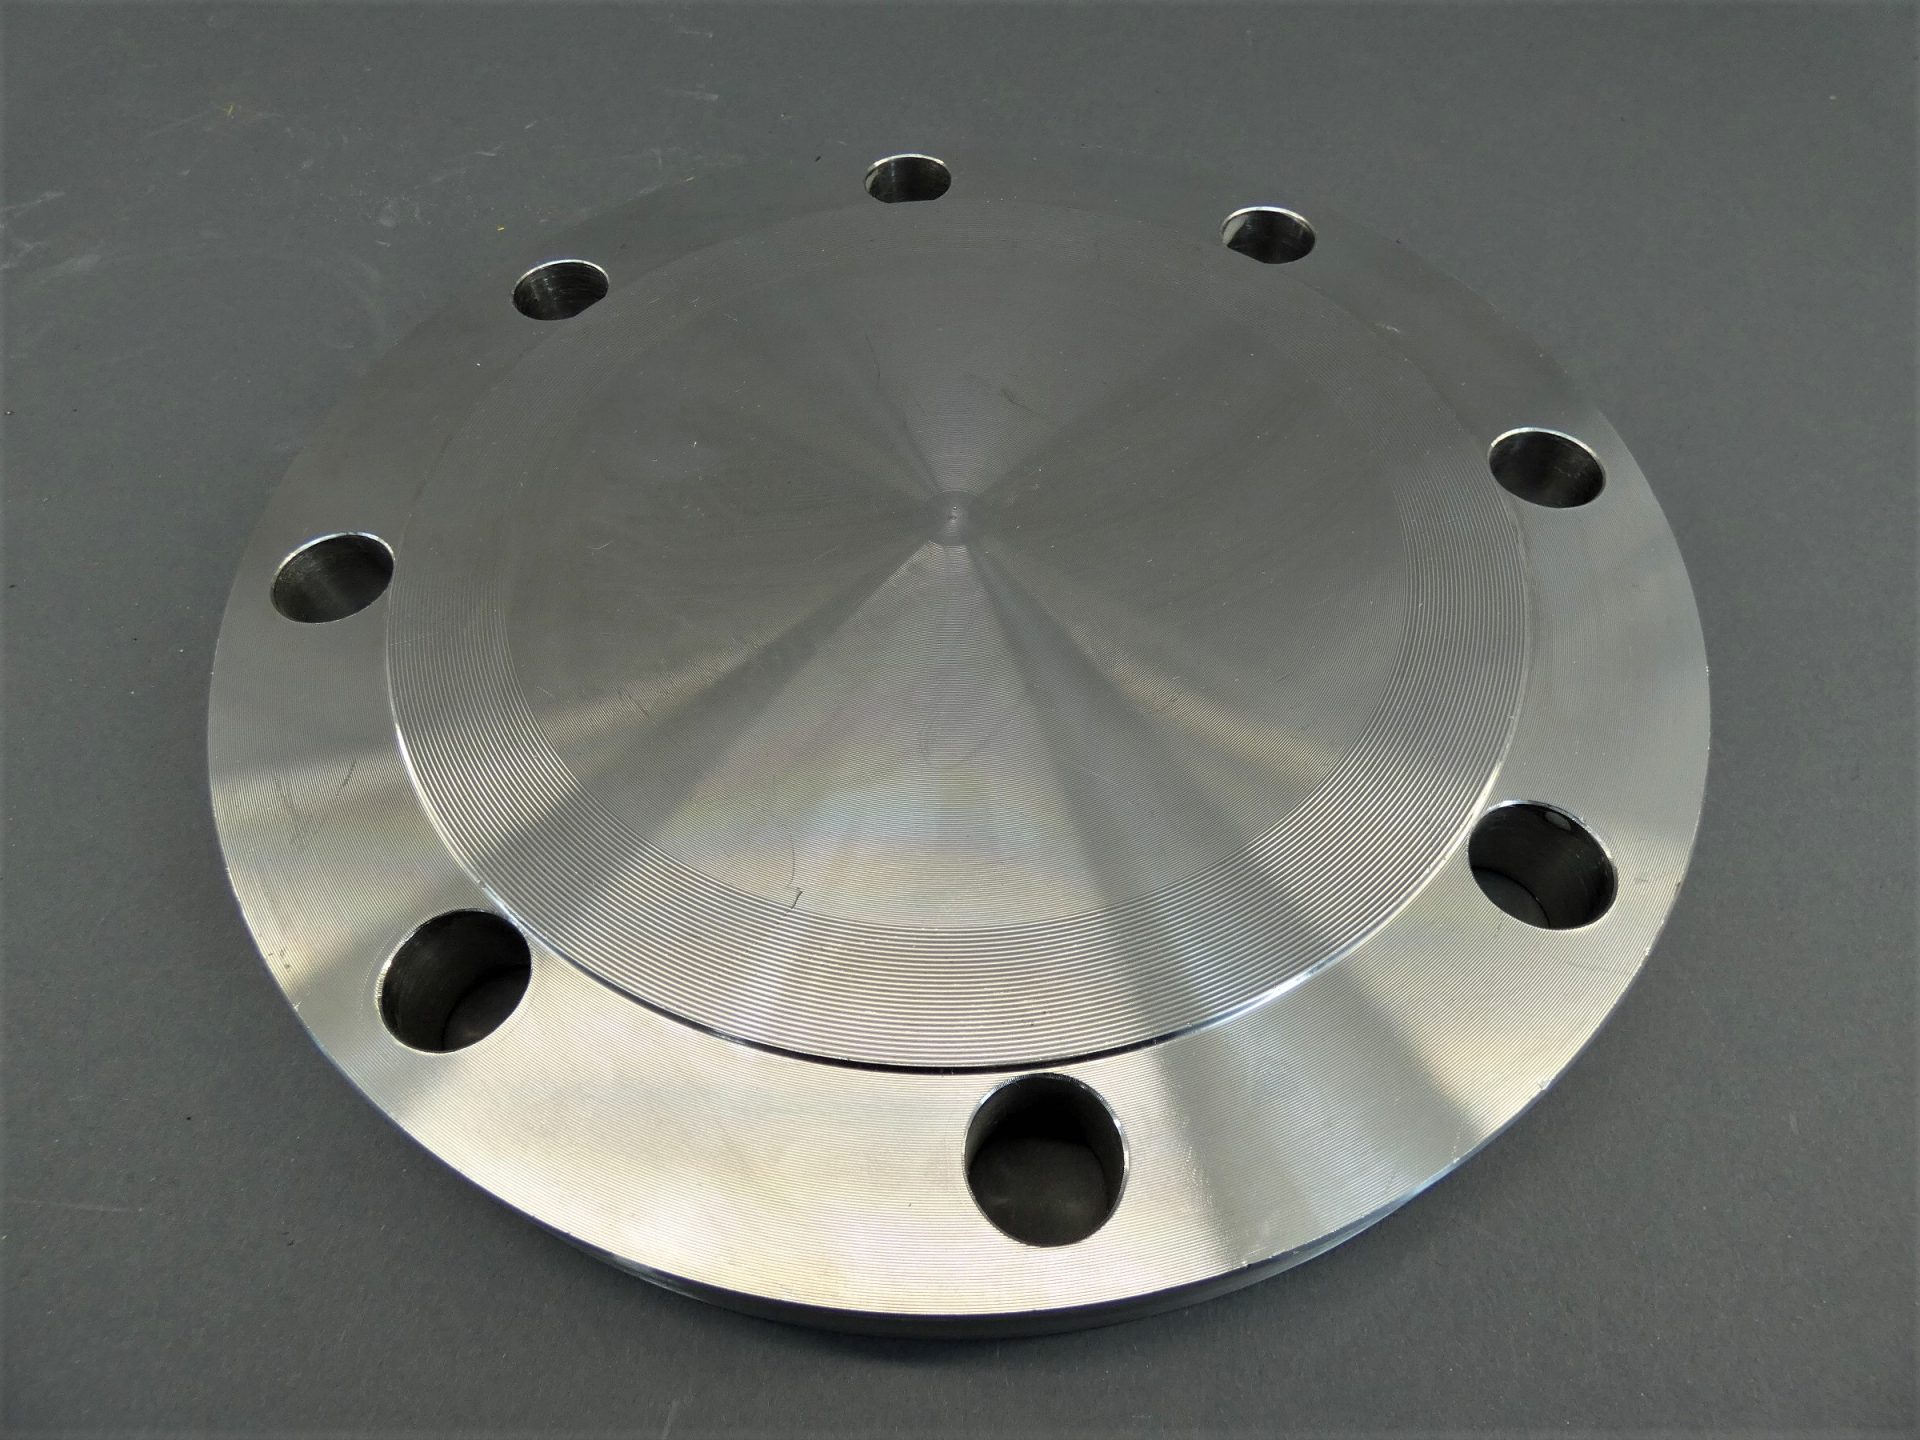 6″ Ansi Blind Flange B165 A182 Raised Face Rf Stainless Steel 150 316316l Ss Gpm Surplus 4755